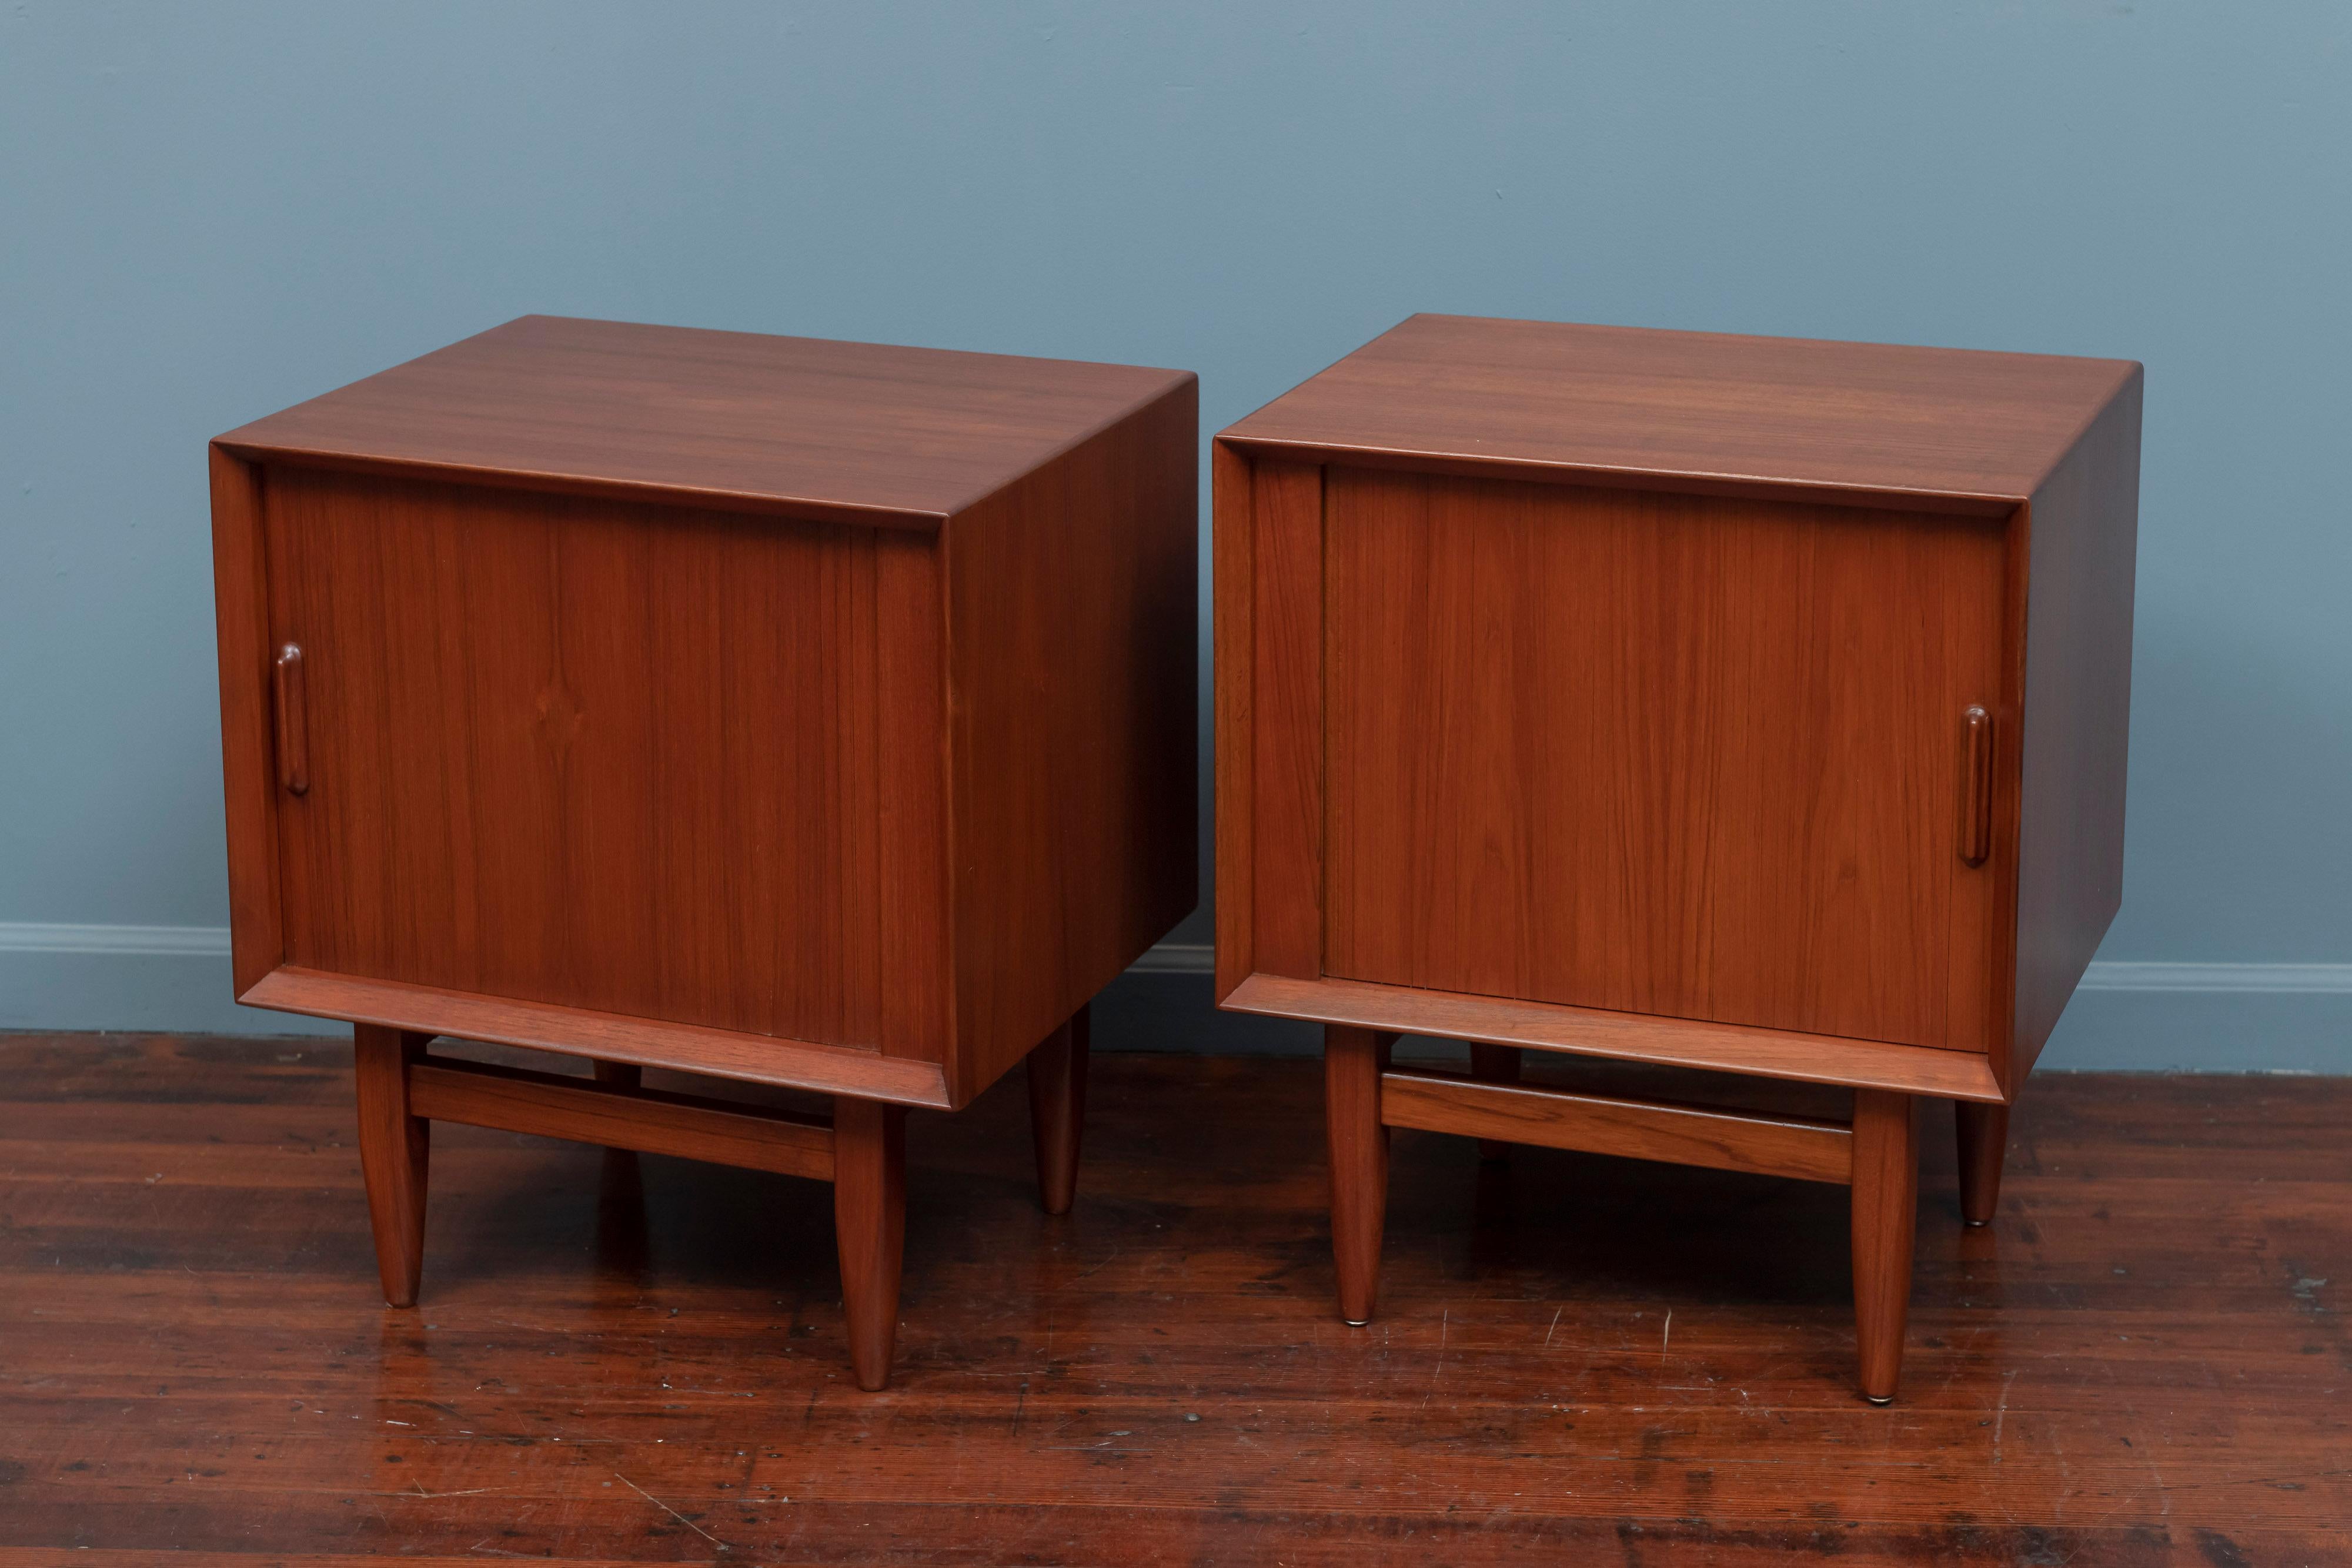 Pair of Scandinavian Modern teak nightstands with tabor doors and contrasting blonde interiors. High quality design and construction newly refinished and ready to install.